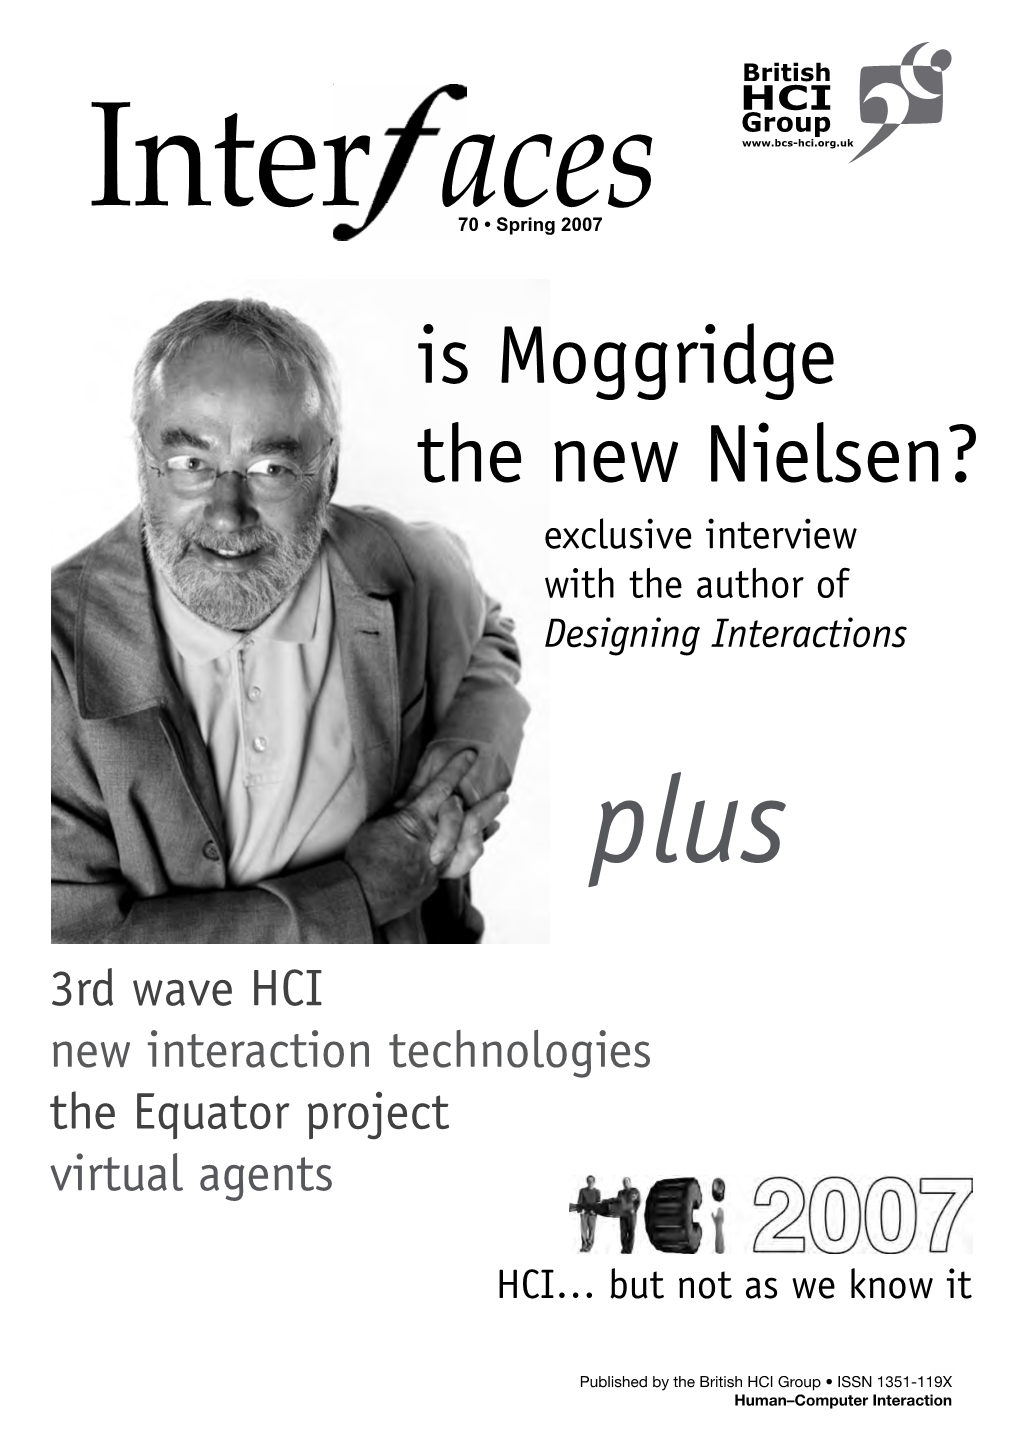 Spring 2007 Is Moggridge the New Nielsen? Exclusive Interview with the Author of Designing Interactions Plus